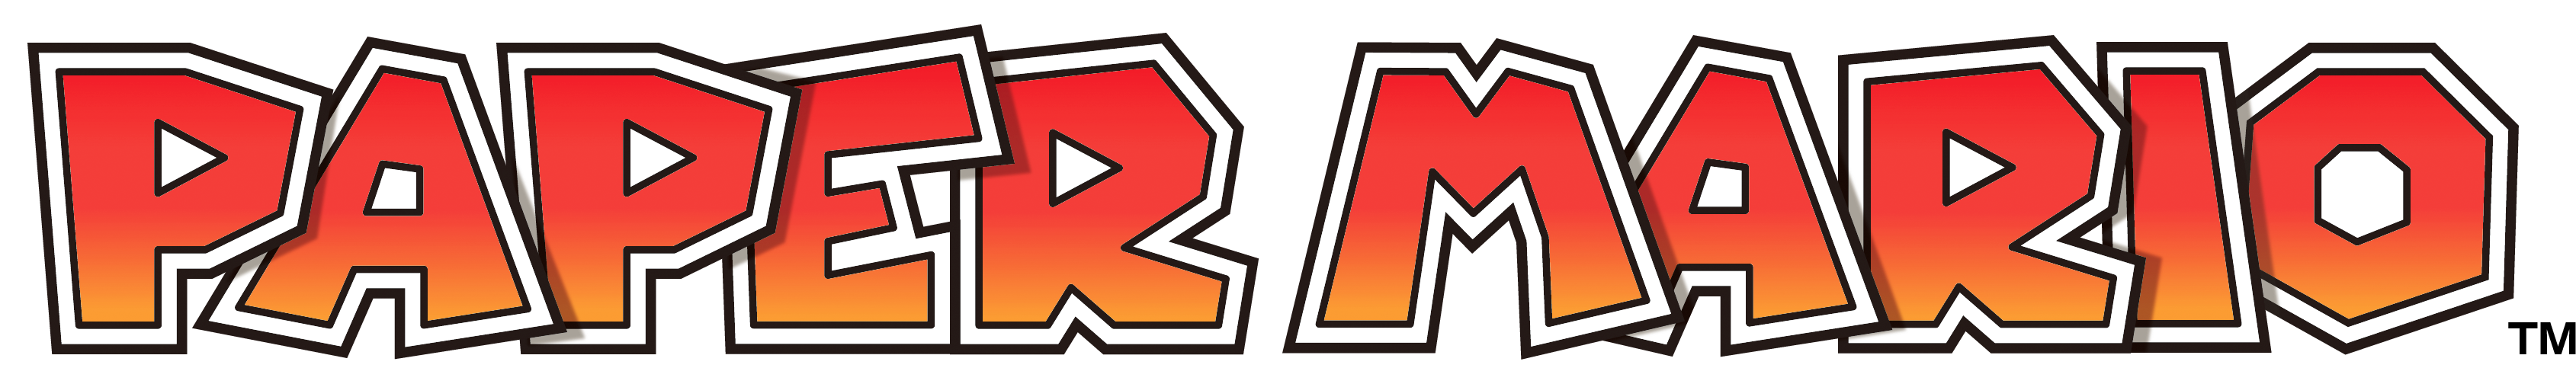 Pm3dlogo.png